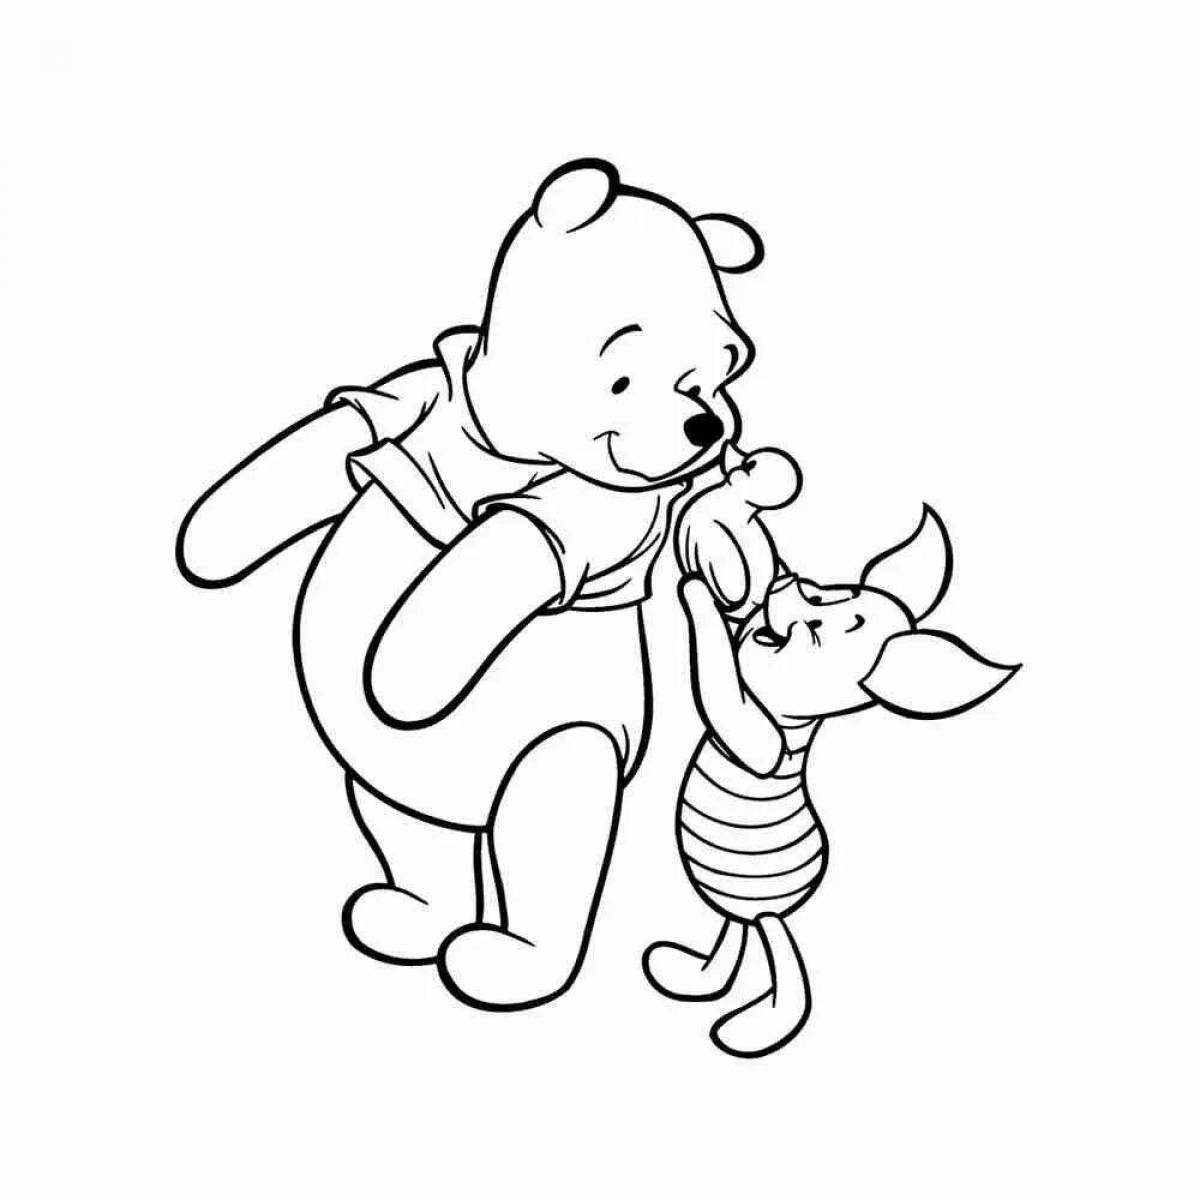 Adorable Piglet and Winnipoo Coloring Pages